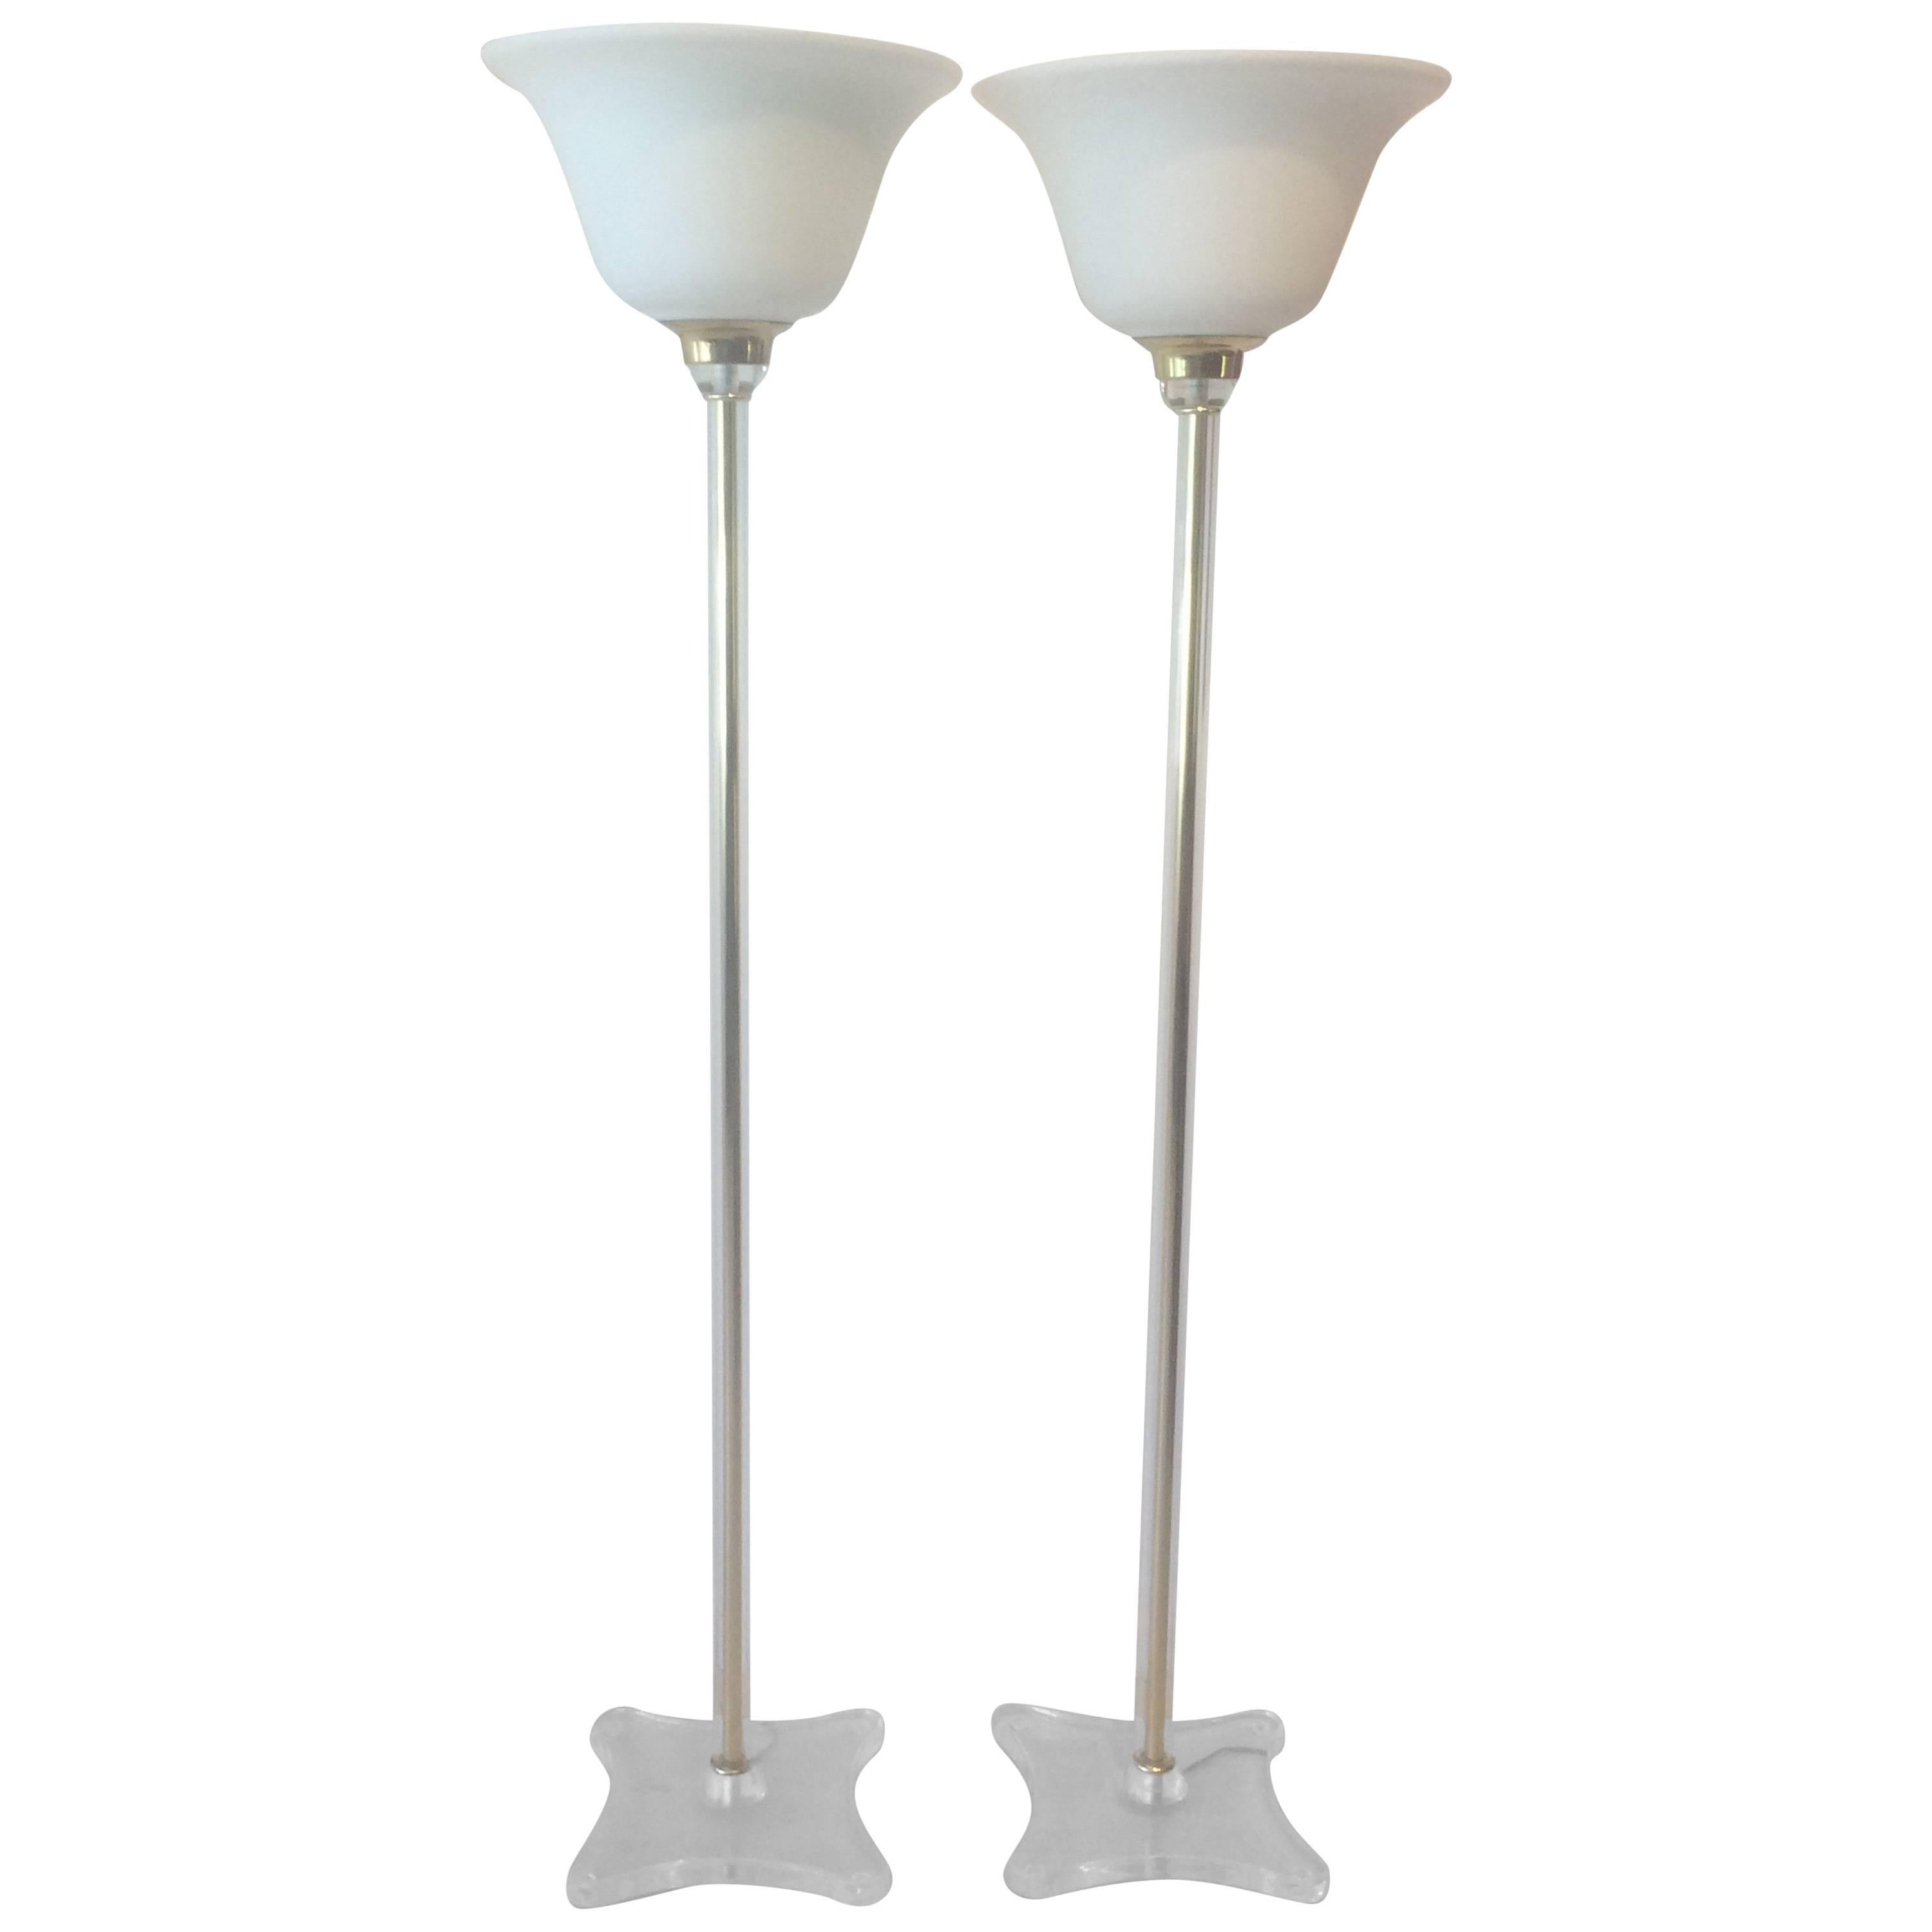 Vintage Lucite and Glass Tochiere Floor Lamps, circa 1980s